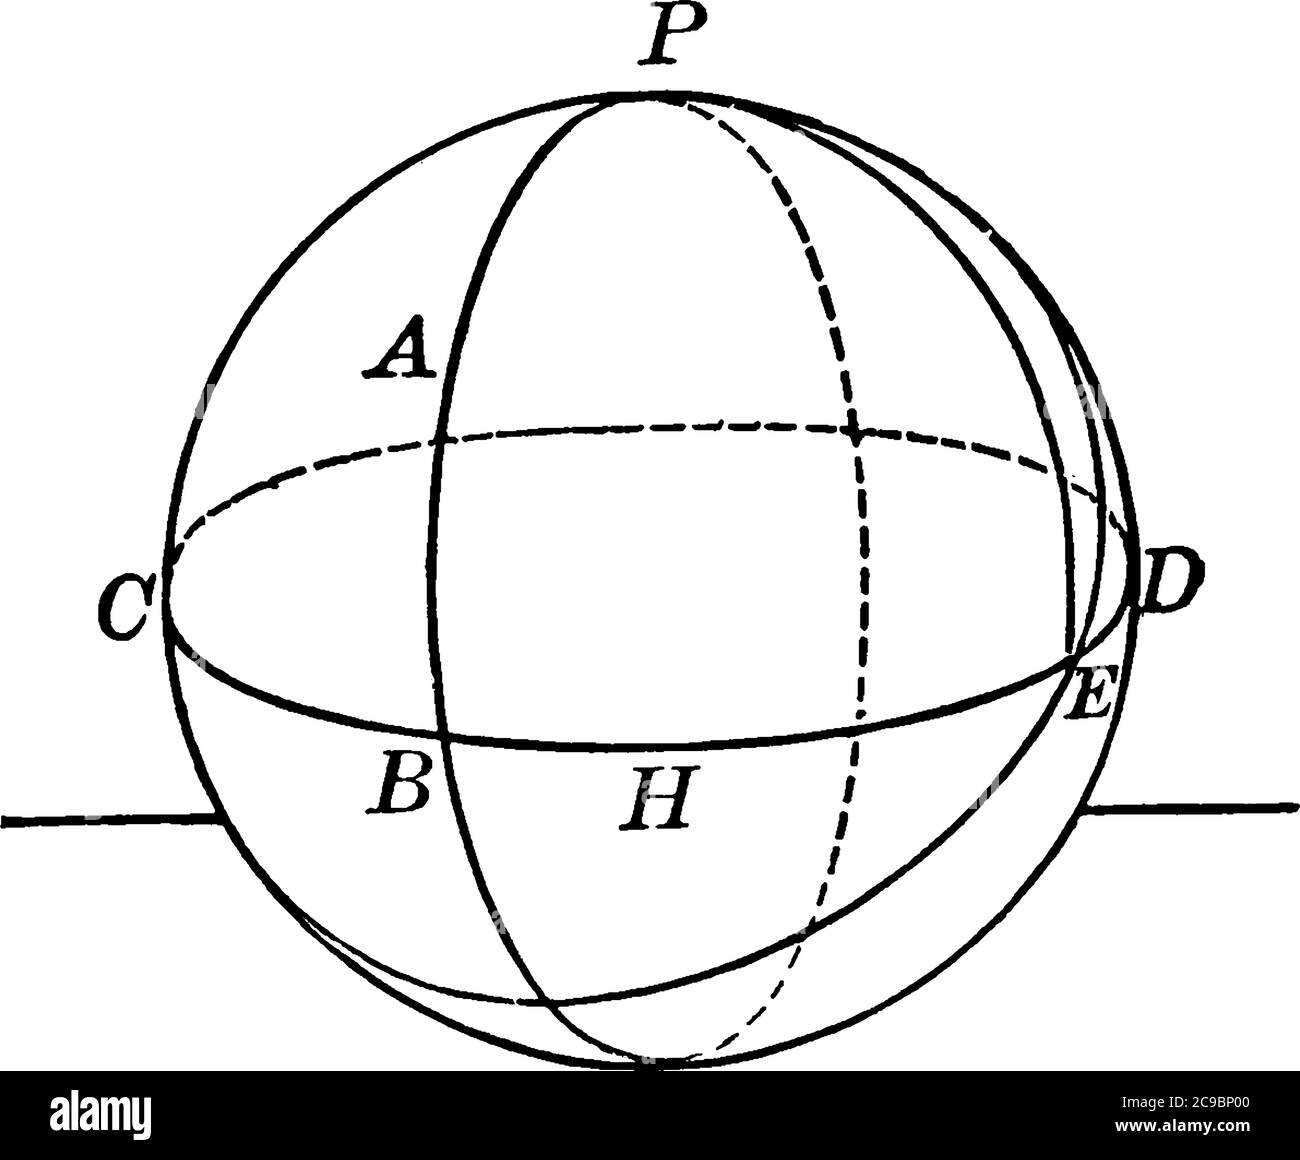 Sphere with two circular arcs and sectors labelled, vintage line drawing or engraving illustration. Stock Vector